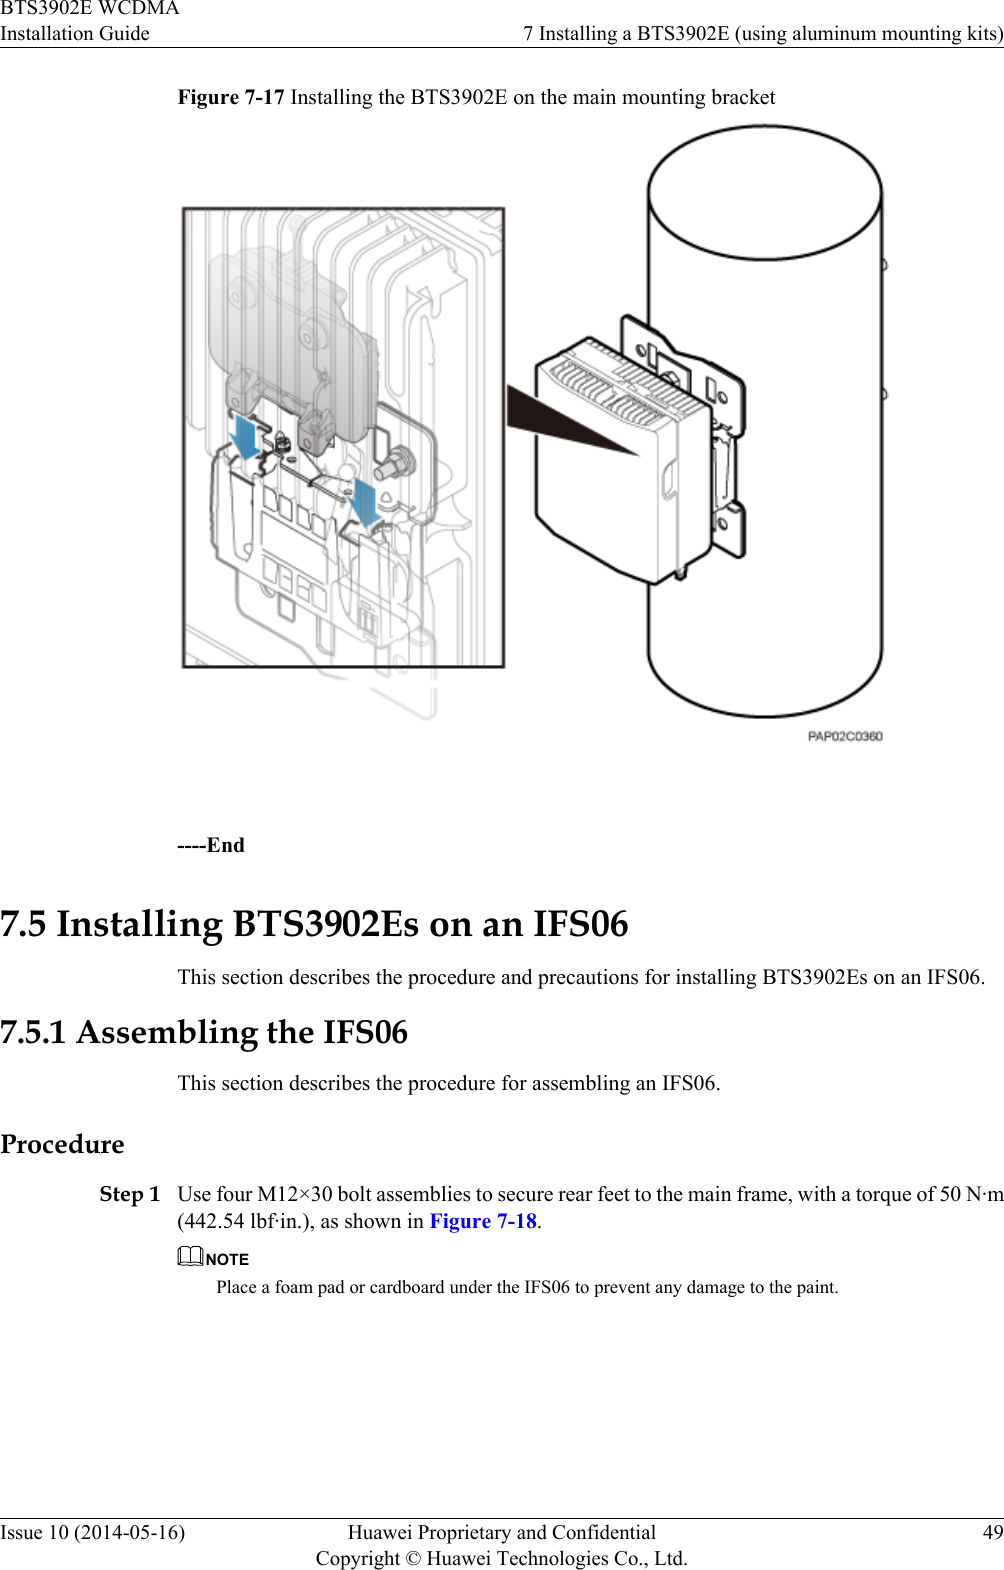 Figure 7-17 Installing the BTS3902E on the main mounting bracket ----End7.5 Installing BTS3902Es on an IFS06This section describes the procedure and precautions for installing BTS3902Es on an IFS06.7.5.1 Assembling the IFS06This section describes the procedure for assembling an IFS06.ProcedureStep 1 Use four M12×30 bolt assemblies to secure rear feet to the main frame, with a torque of 50 N·m(442.54 lbf·in.), as shown in Figure 7-18.NOTEPlace a foam pad or cardboard under the IFS06 to prevent any damage to the paint.BTS3902E WCDMAInstallation Guide 7 Installing a BTS3902E (using aluminum mounting kits)Issue 10 (2014-05-16) Huawei Proprietary and ConfidentialCopyright © Huawei Technologies Co., Ltd.49